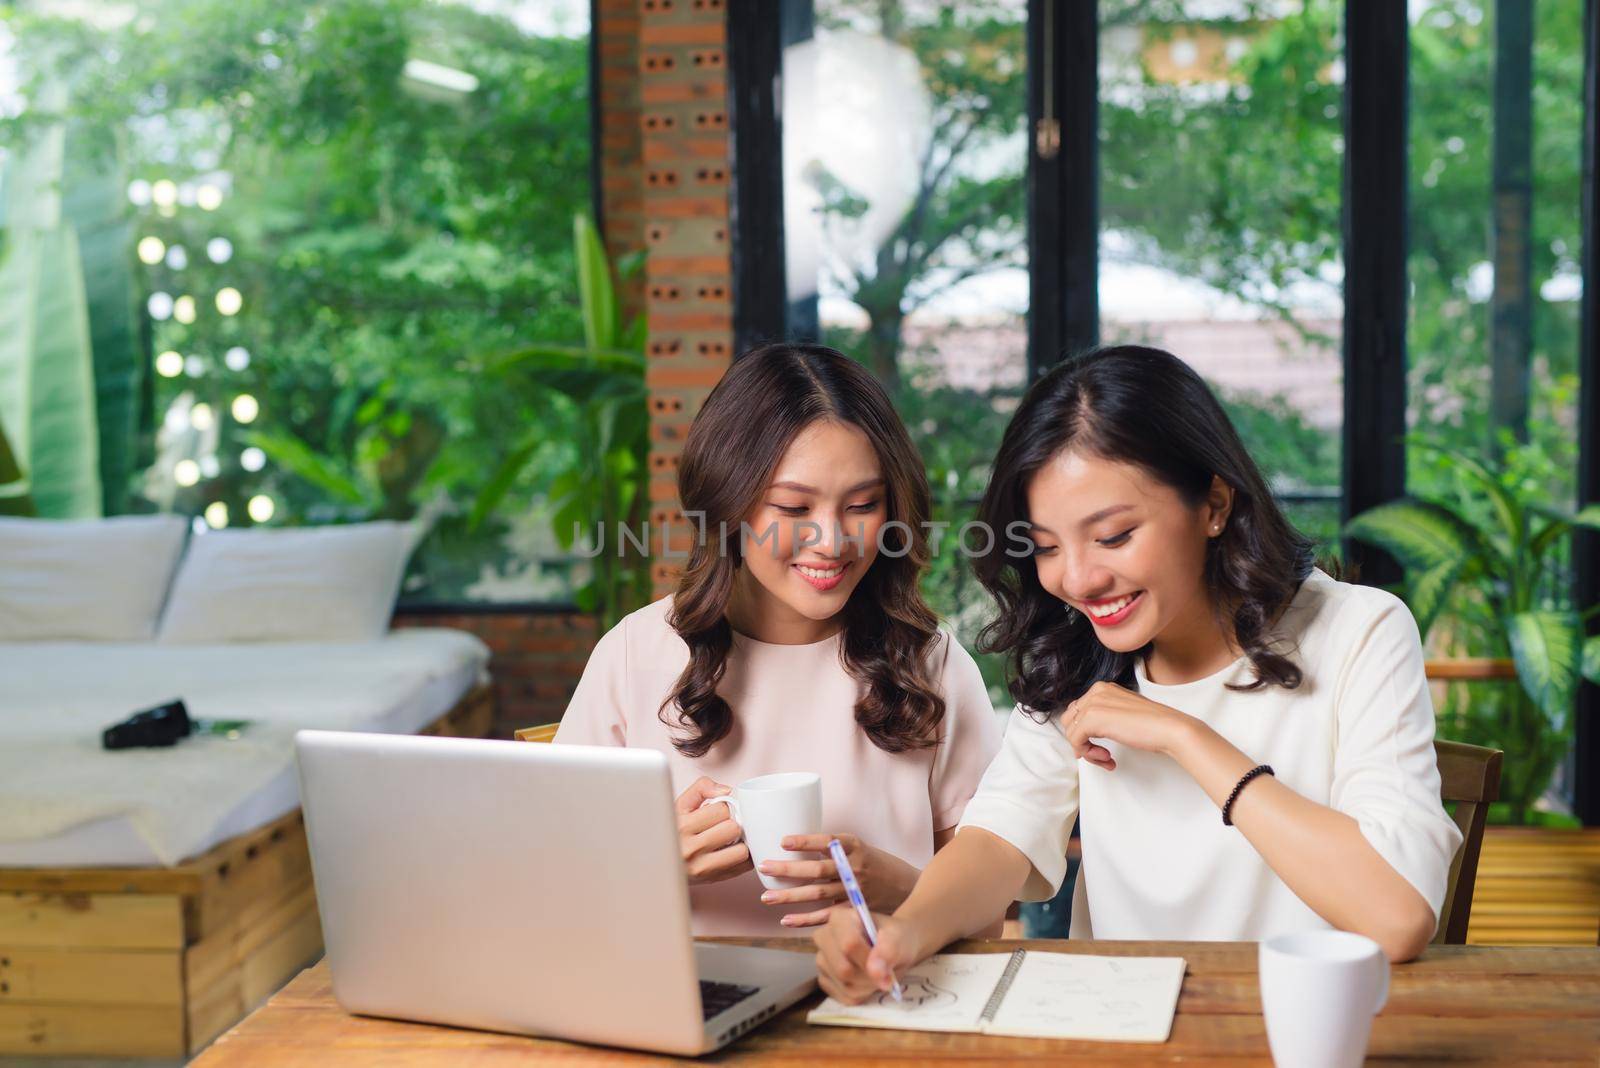 Two multiracial young female friends surfing the internet together on a laptop as they sit in a cafeteria enjoying a cup of coffee